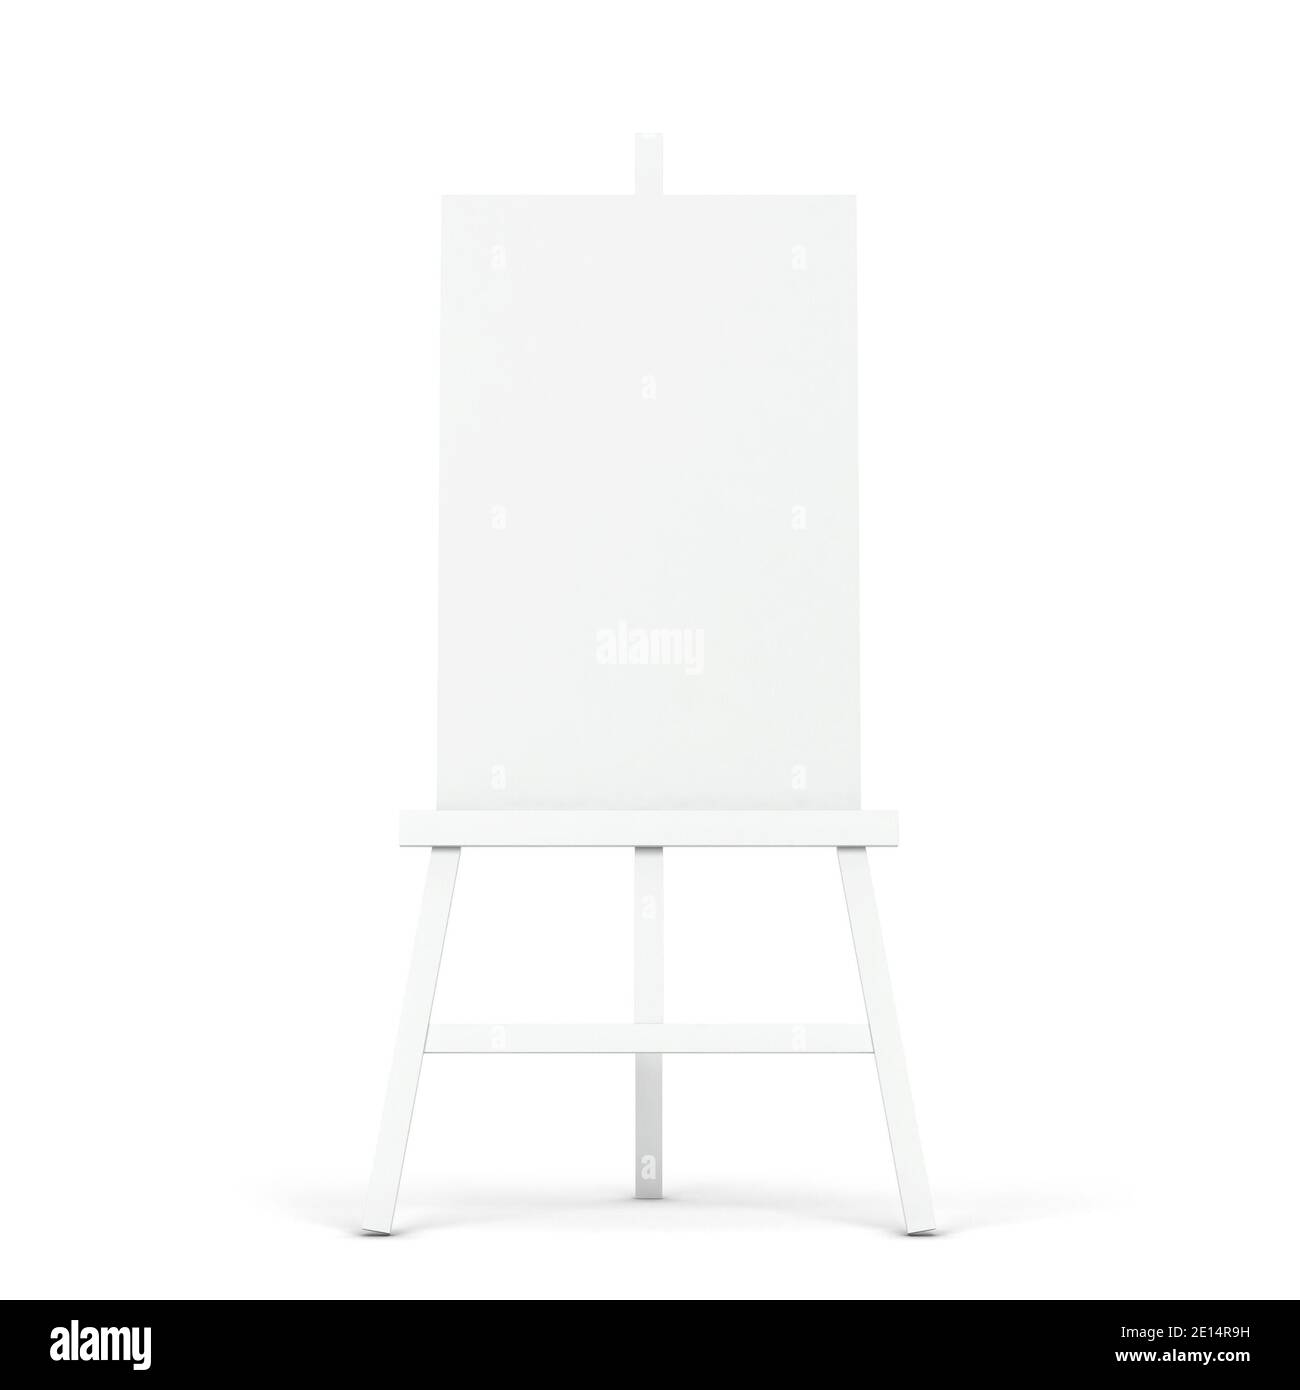 Blank portrait table top flip chart easel binder or calendar mockup  standing on white background isolated with clipping path Stock Photo - Alamy